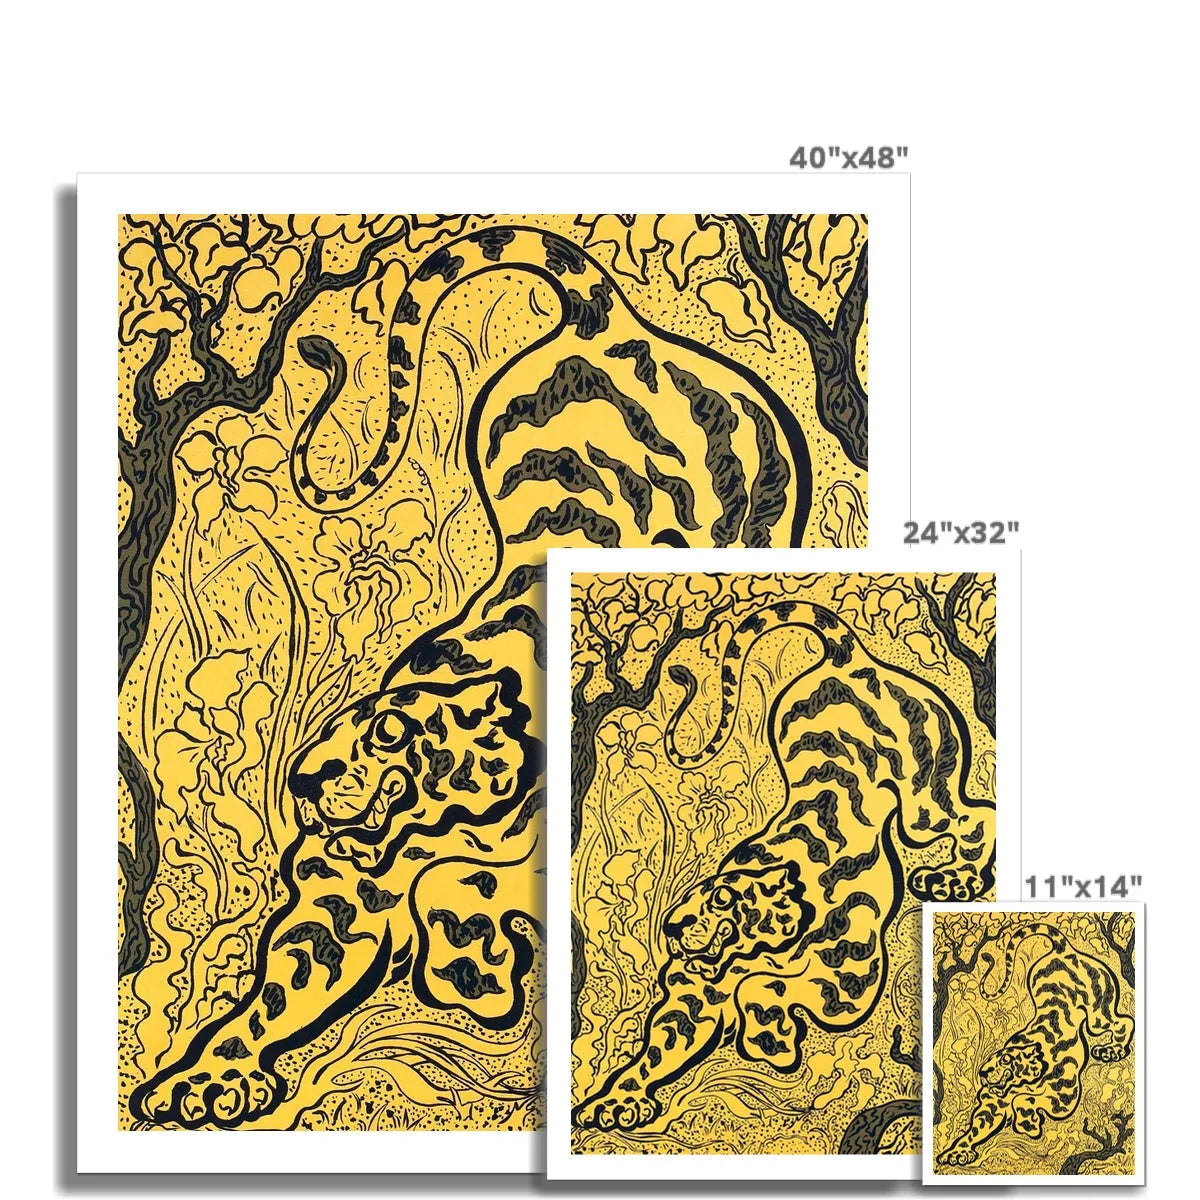 Tiger In The Jungle By Paul Ranson Fine Art Print - Posters Prints & Visual Artwork - Aesthetic Art